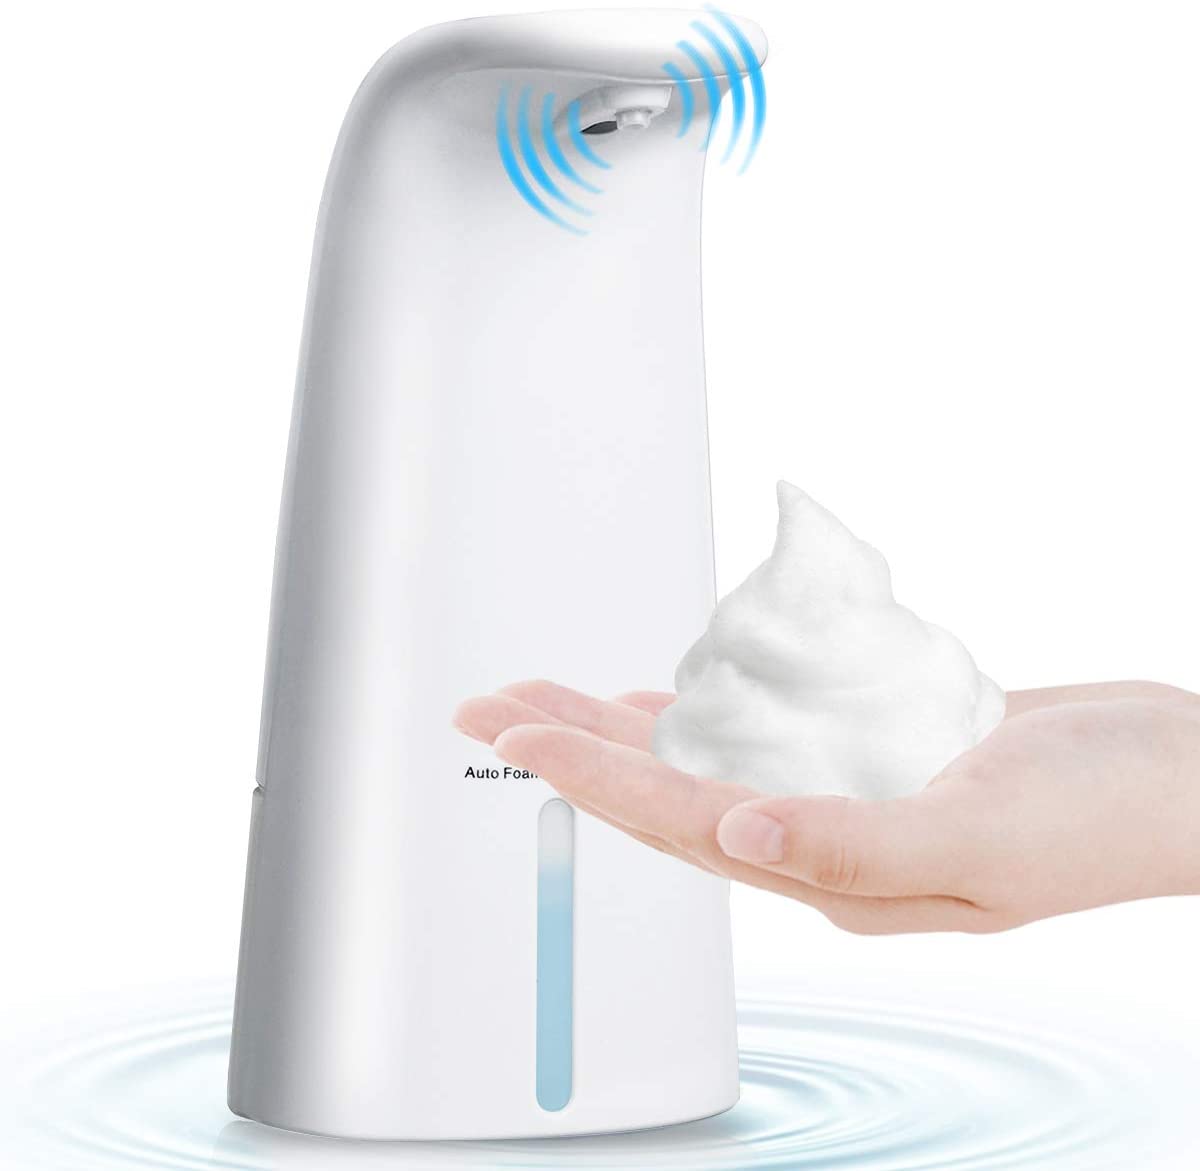 

Automatic Soap Dispenser, Electric Automatic Foaming Upgrade Liquid Touchless Infrared Motion Sensor,Waterproof Base, for Bathroom & Kitchen